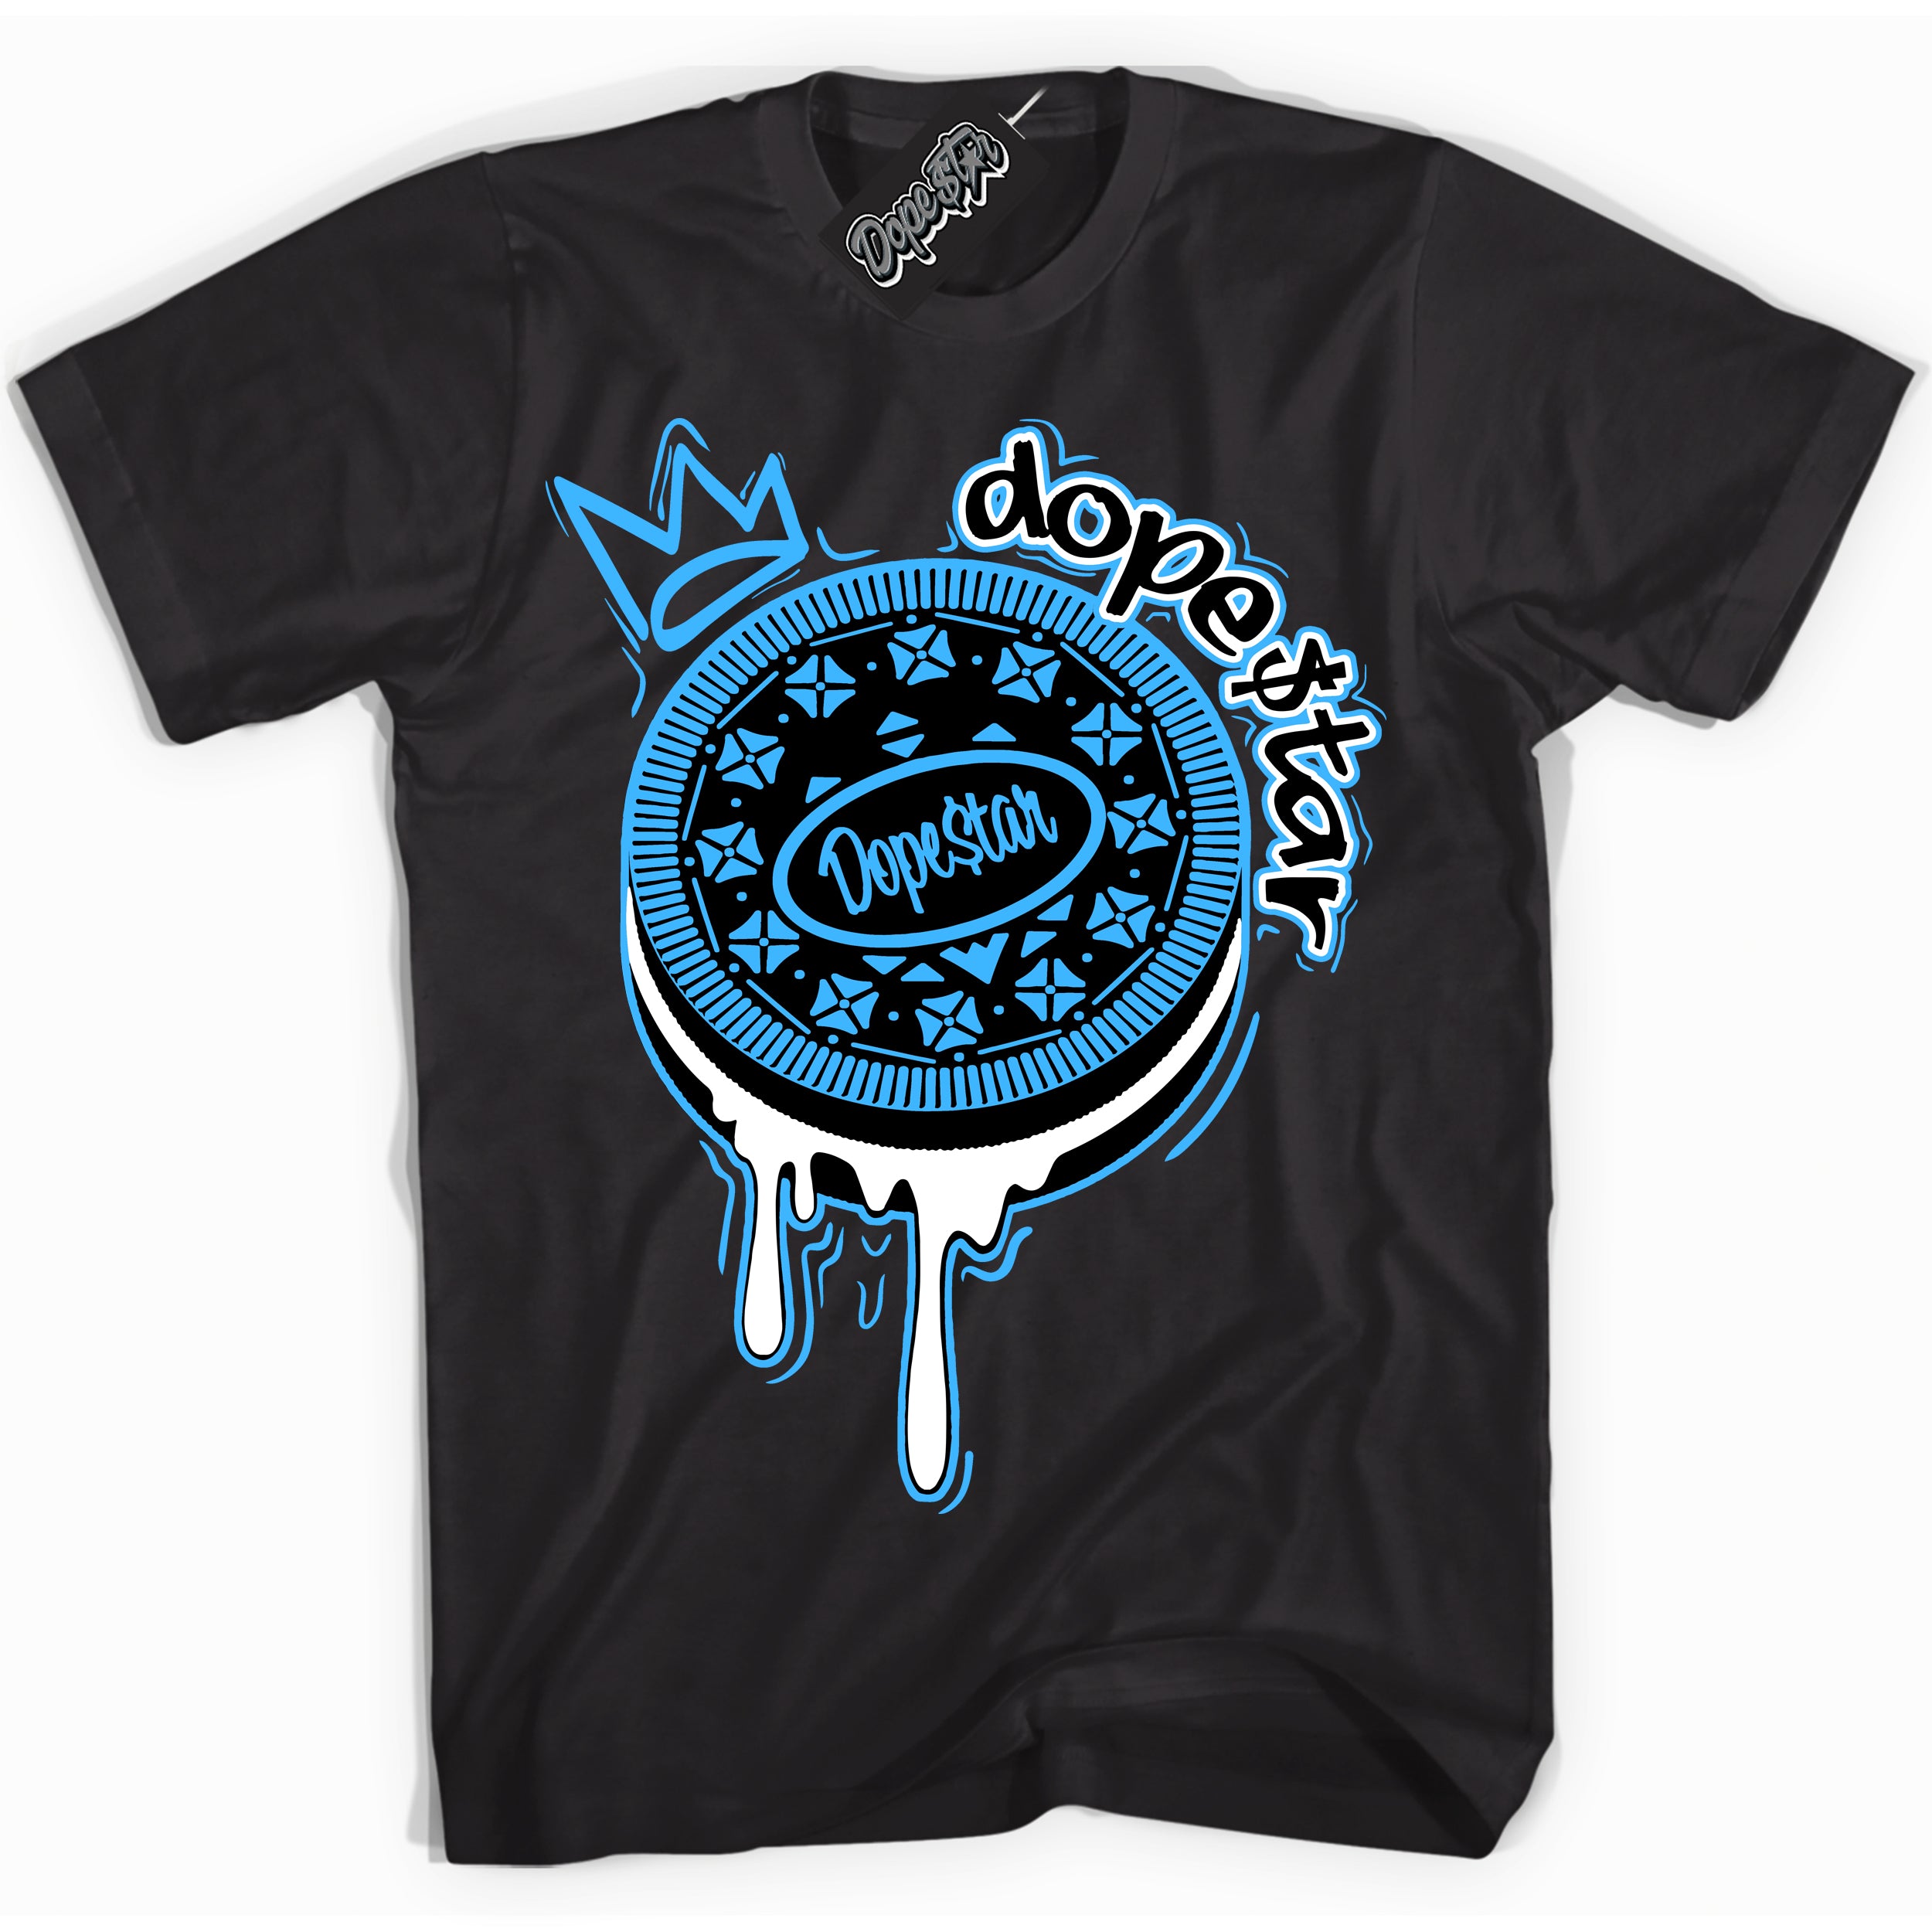 Cool Black graphic tee with “ Oreo DS ” design, that perfectly matches Powder Blue 9s sneakers 